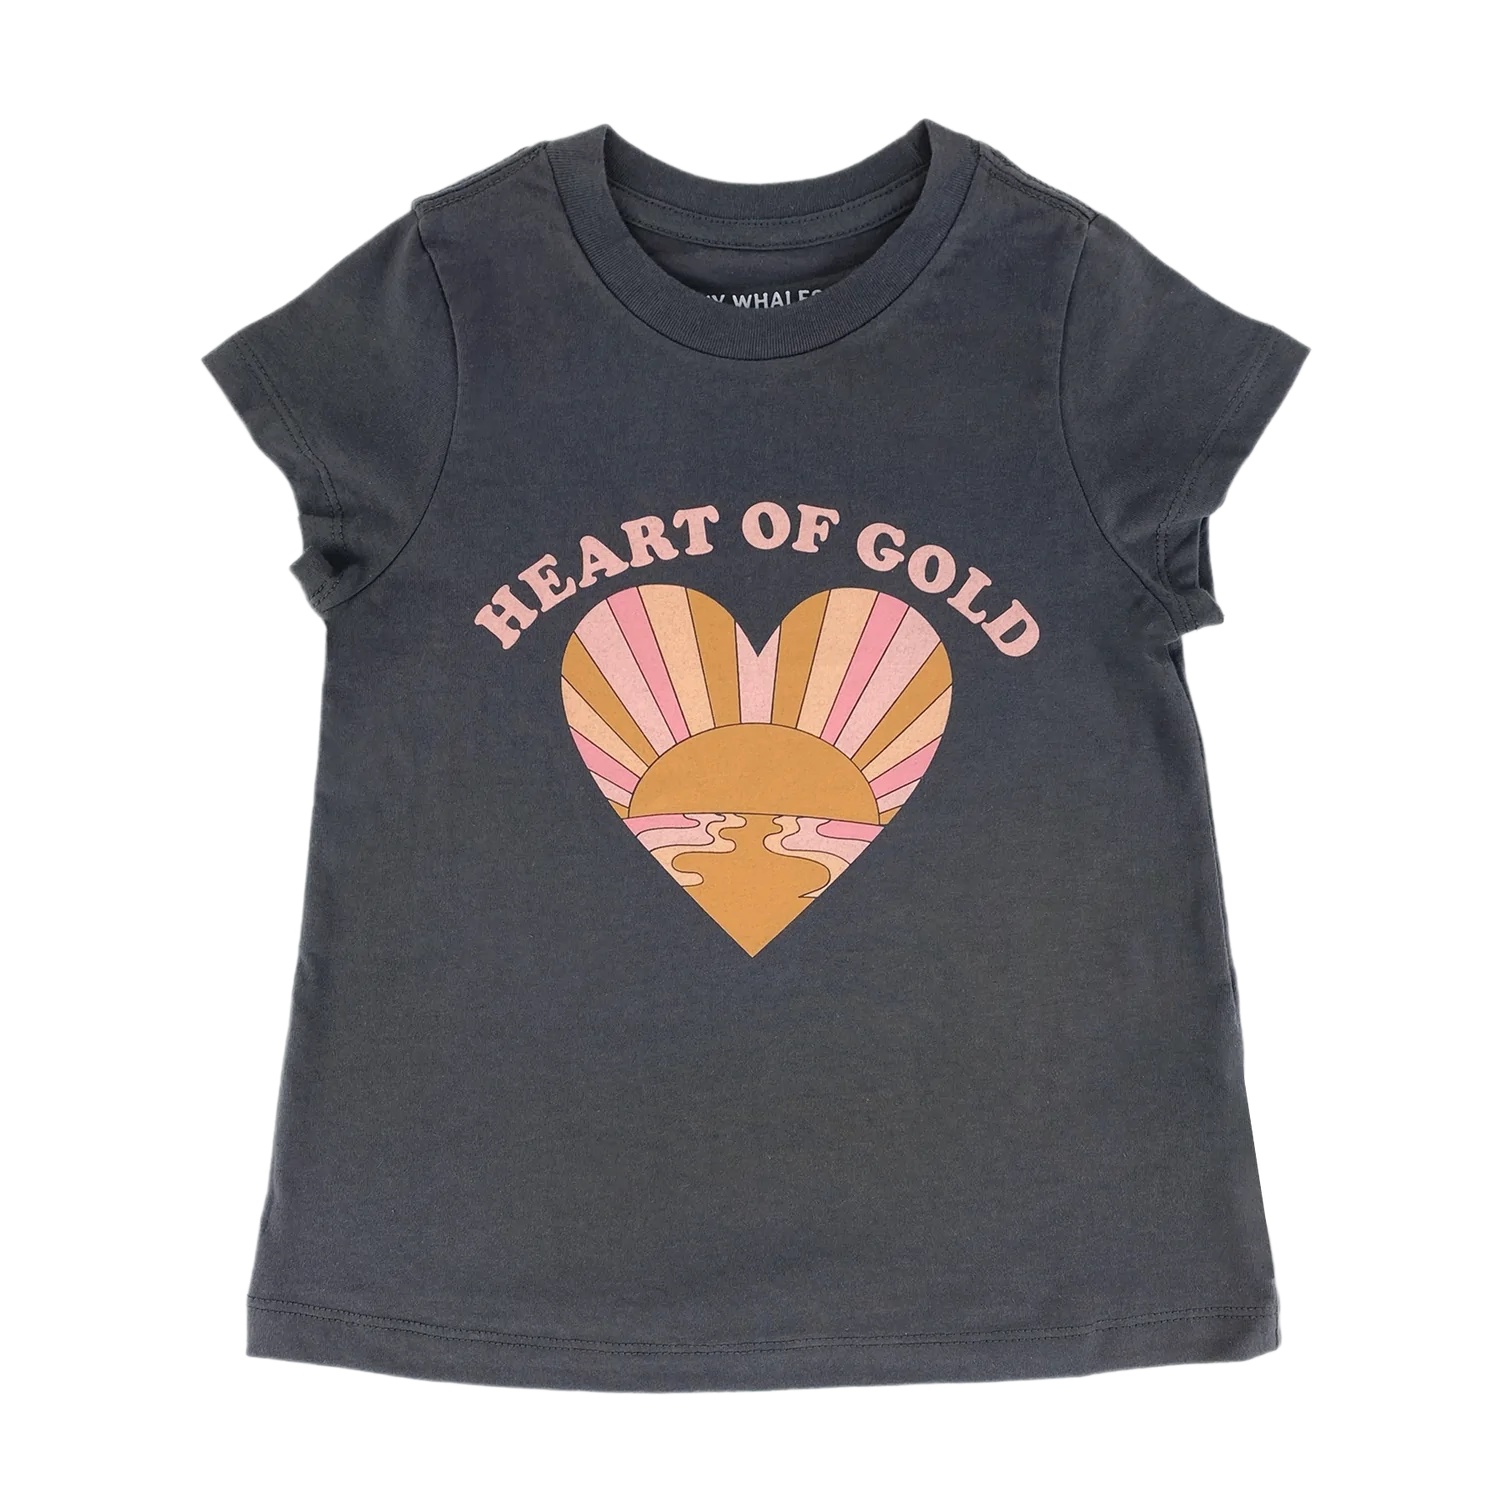 Heart of Gold Tee